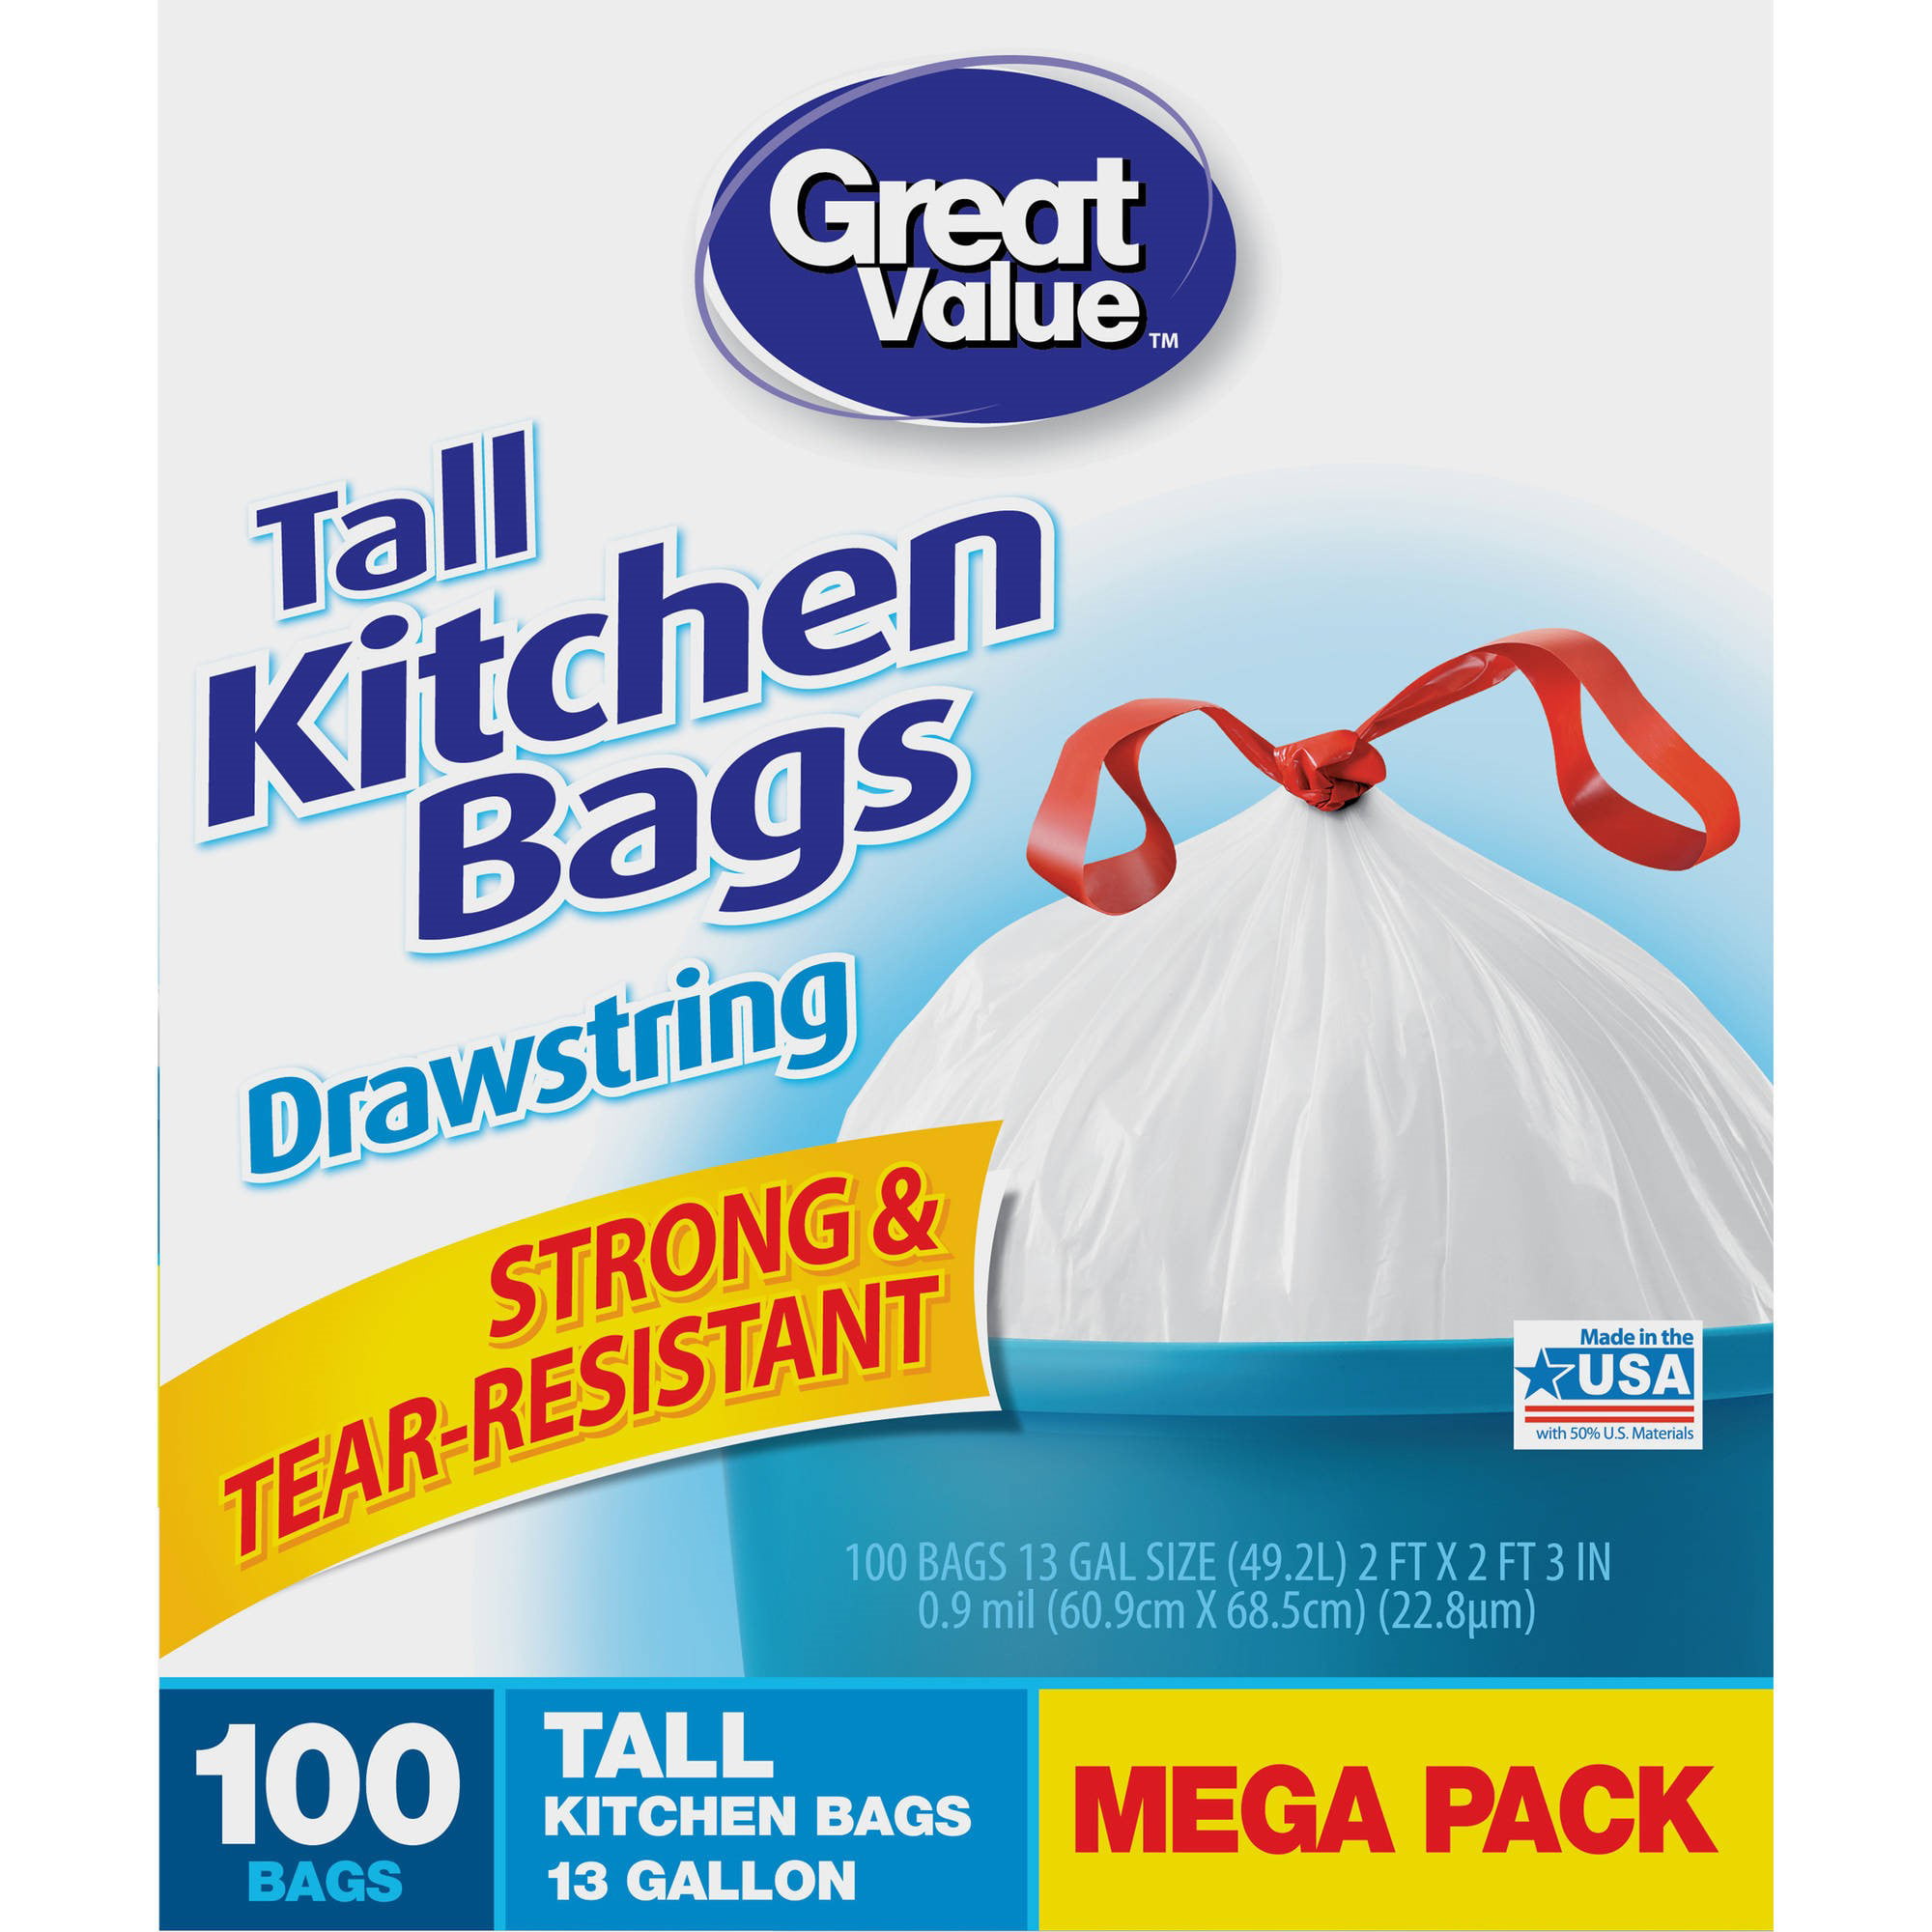 Buy High-Quality 100 Gallon Trash Bags – Perfect for Large Garbage